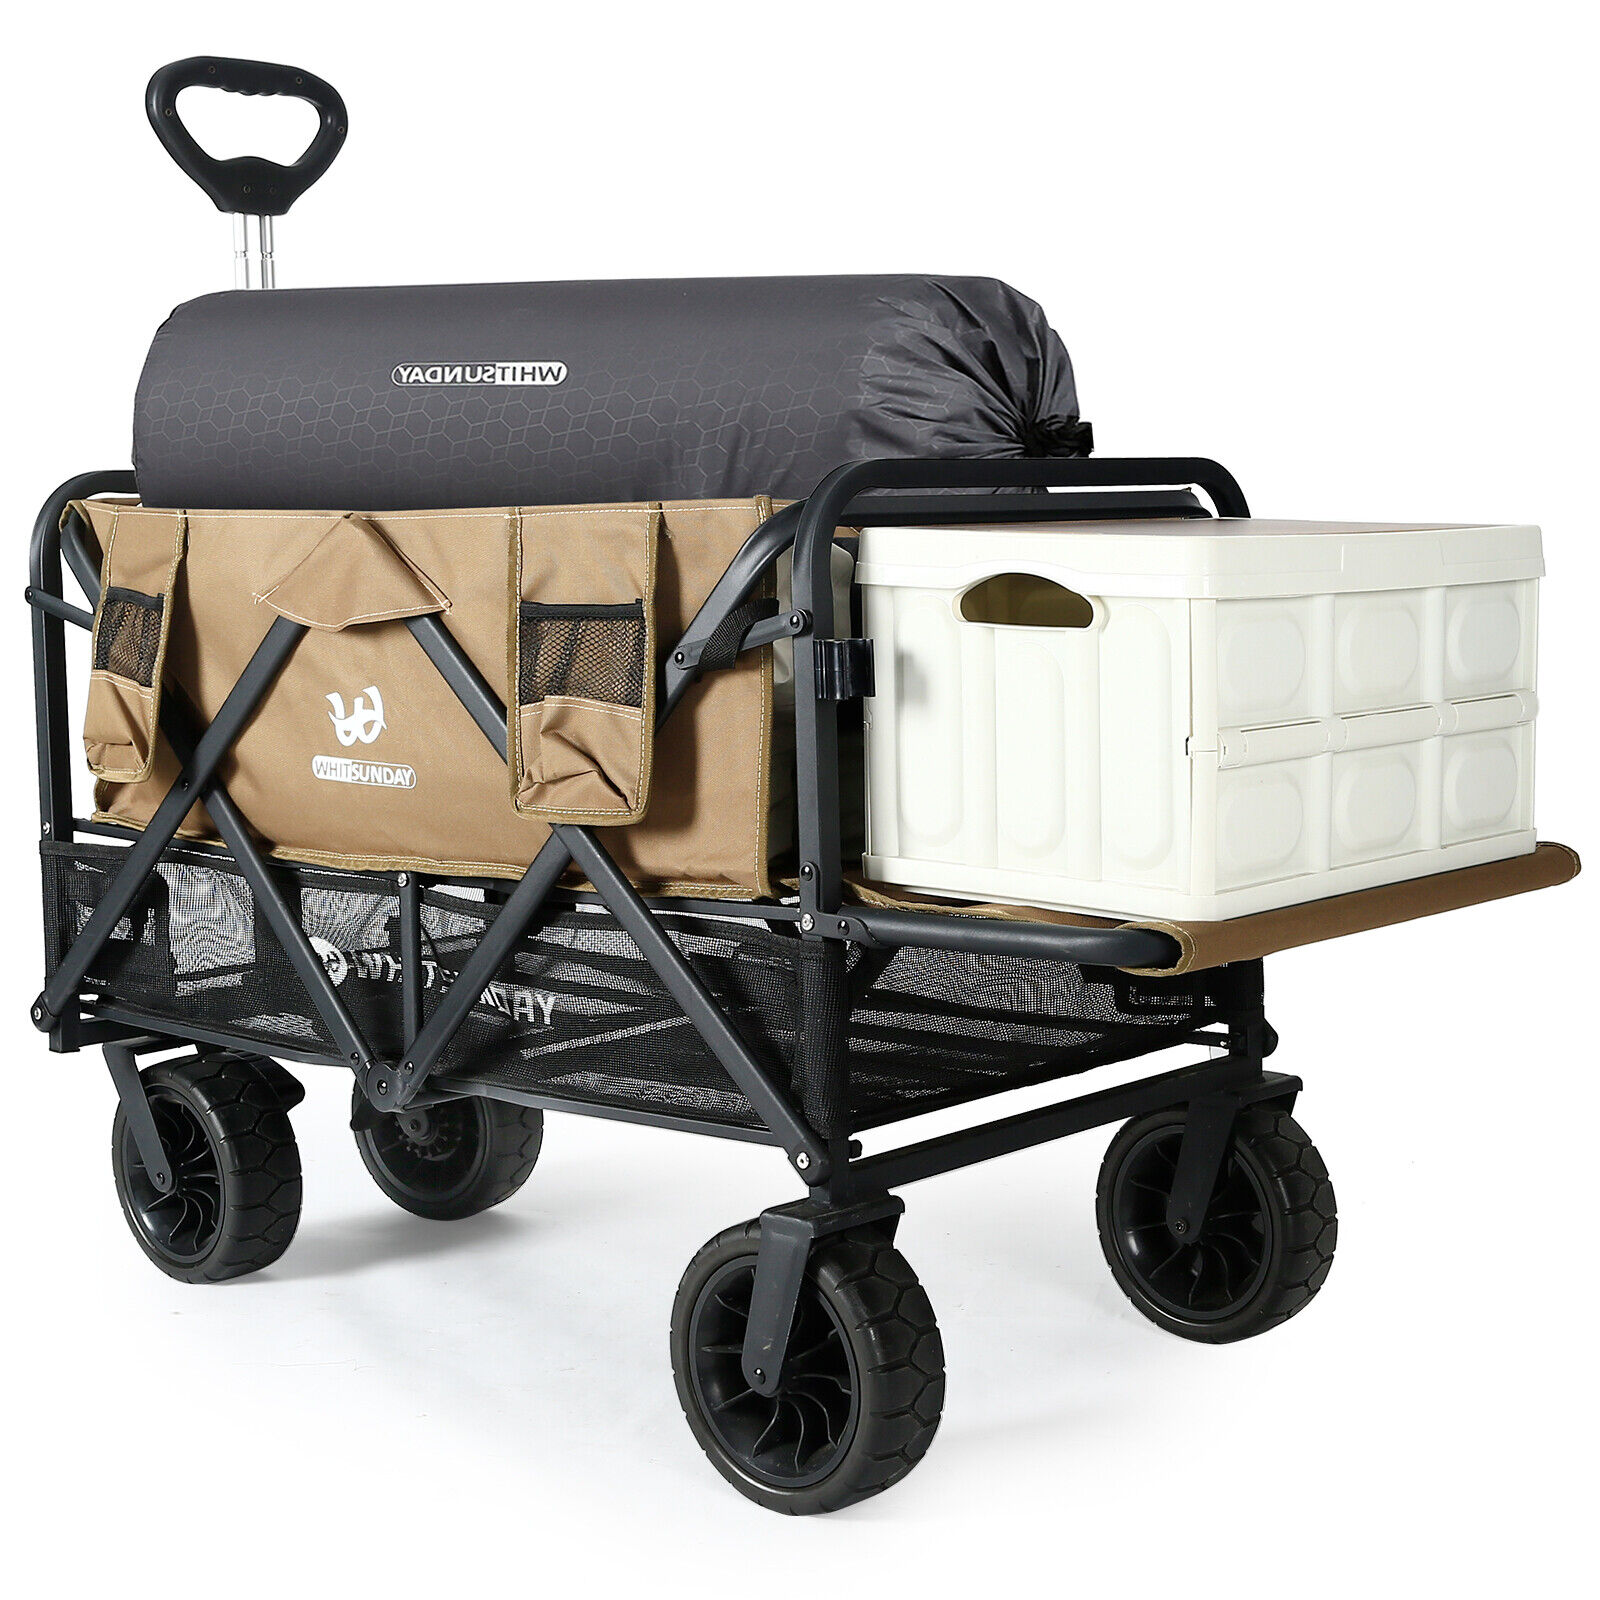 Double Decker Wagon,Collapsible Wagon Heavy Duty Tailgate for Outdoor Camping